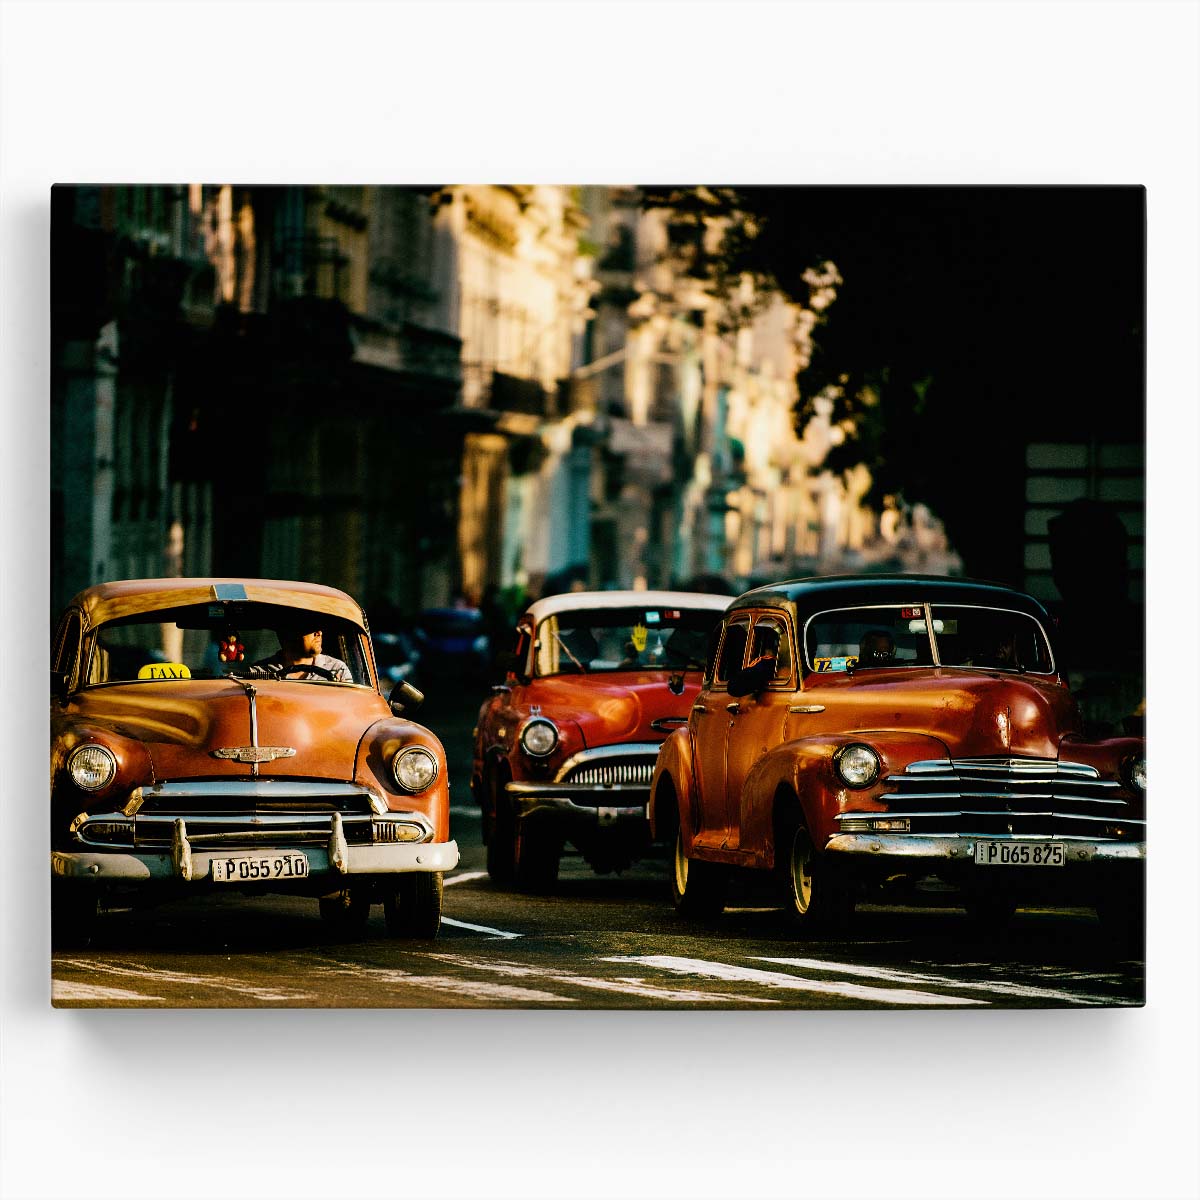 Vintage Classic Cars & Street Lamps in Havana Photography Wall Art by Luxuriance Designs. Made in USA.